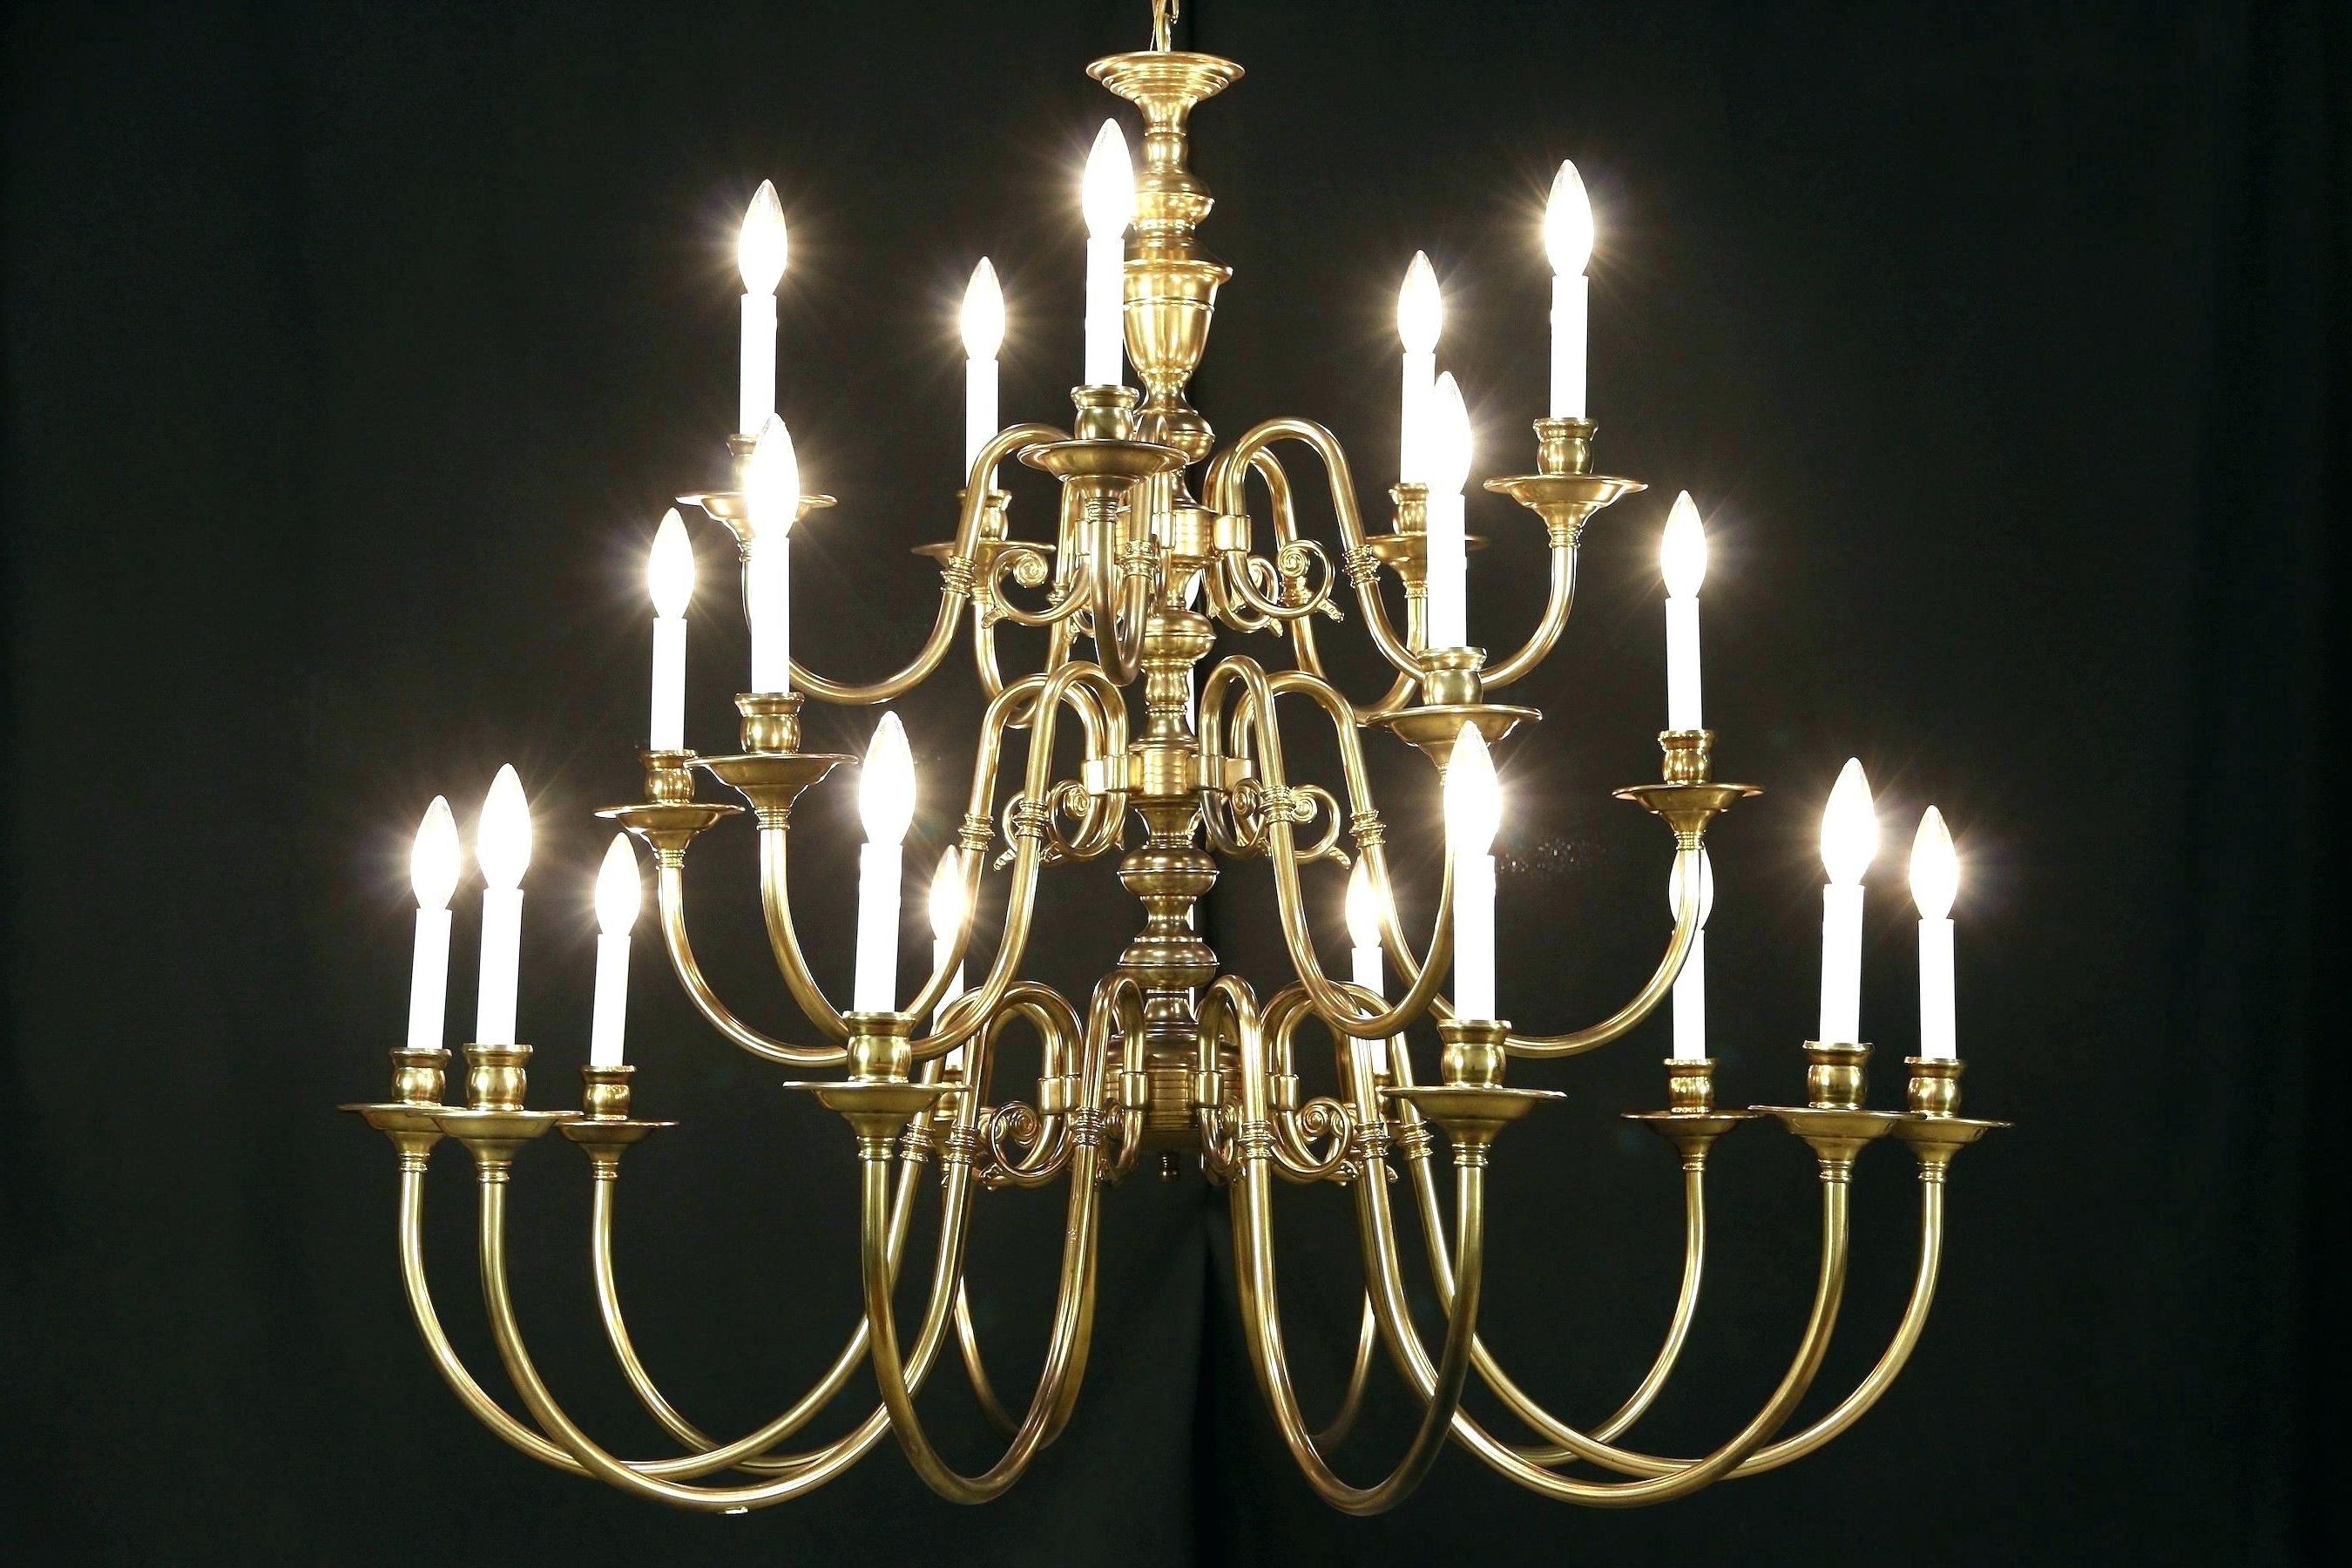 Well Known Hanging Candelabra Chandeliers In Chandeliers : Fabulous Candle Chandelier Fresh 12 Hanging Candle (View 15 of 15)